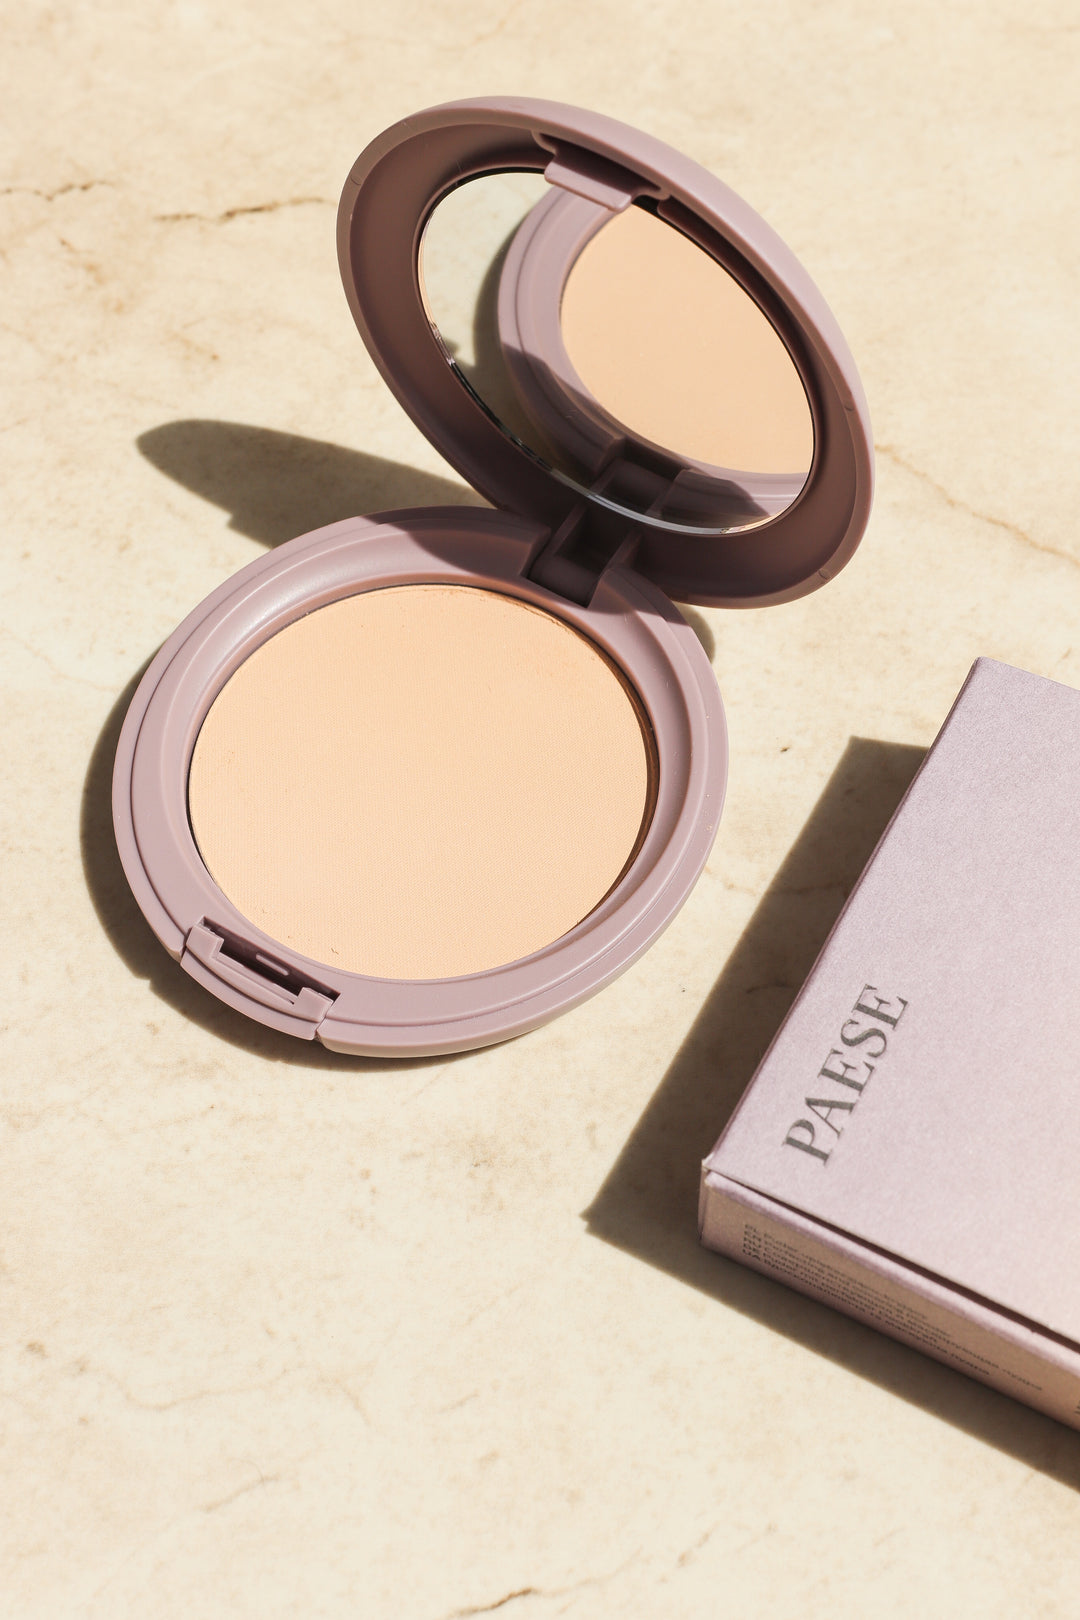 Nanorevit Perfecting and Covering Powder - Polvo Compacto